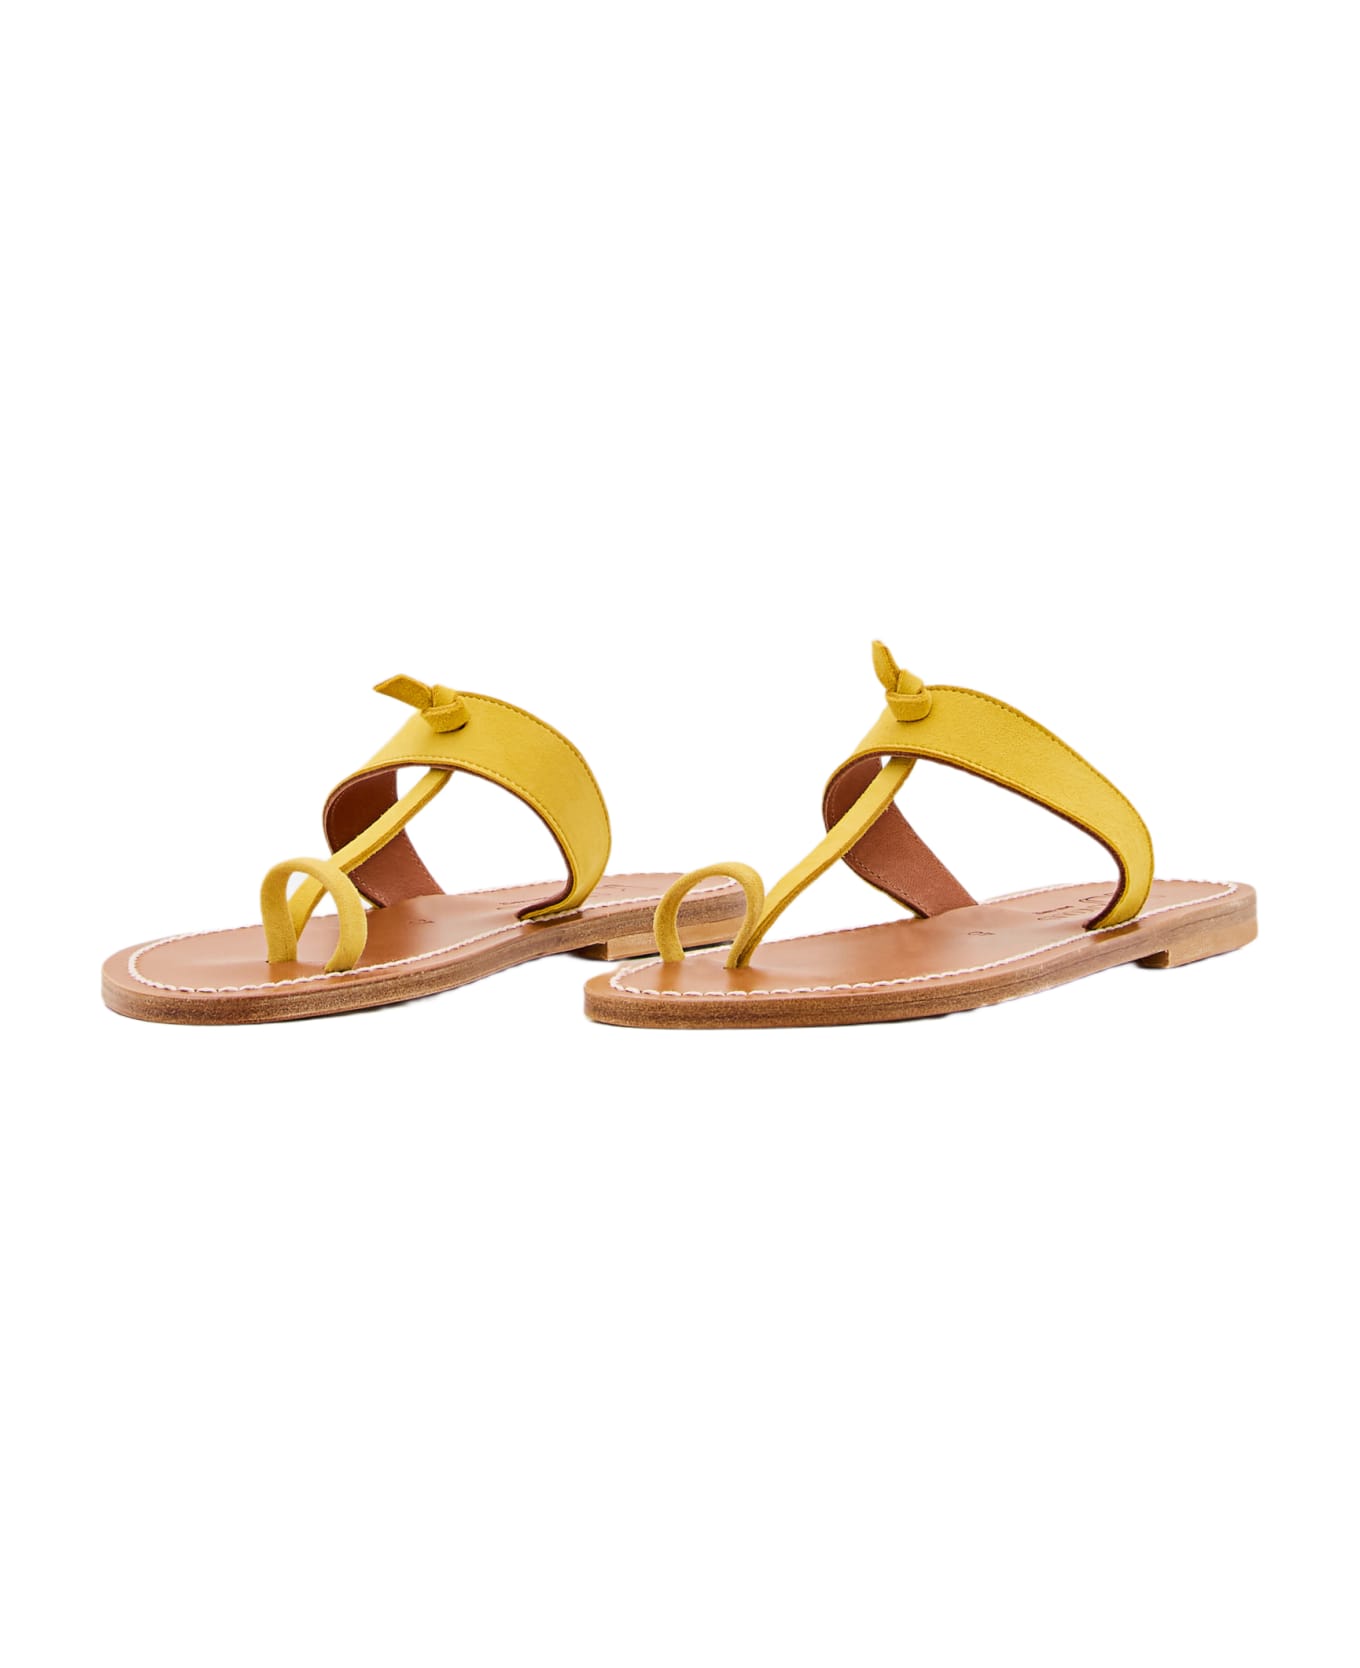 K.Jacques Ganges Leather Sandals - Yellow